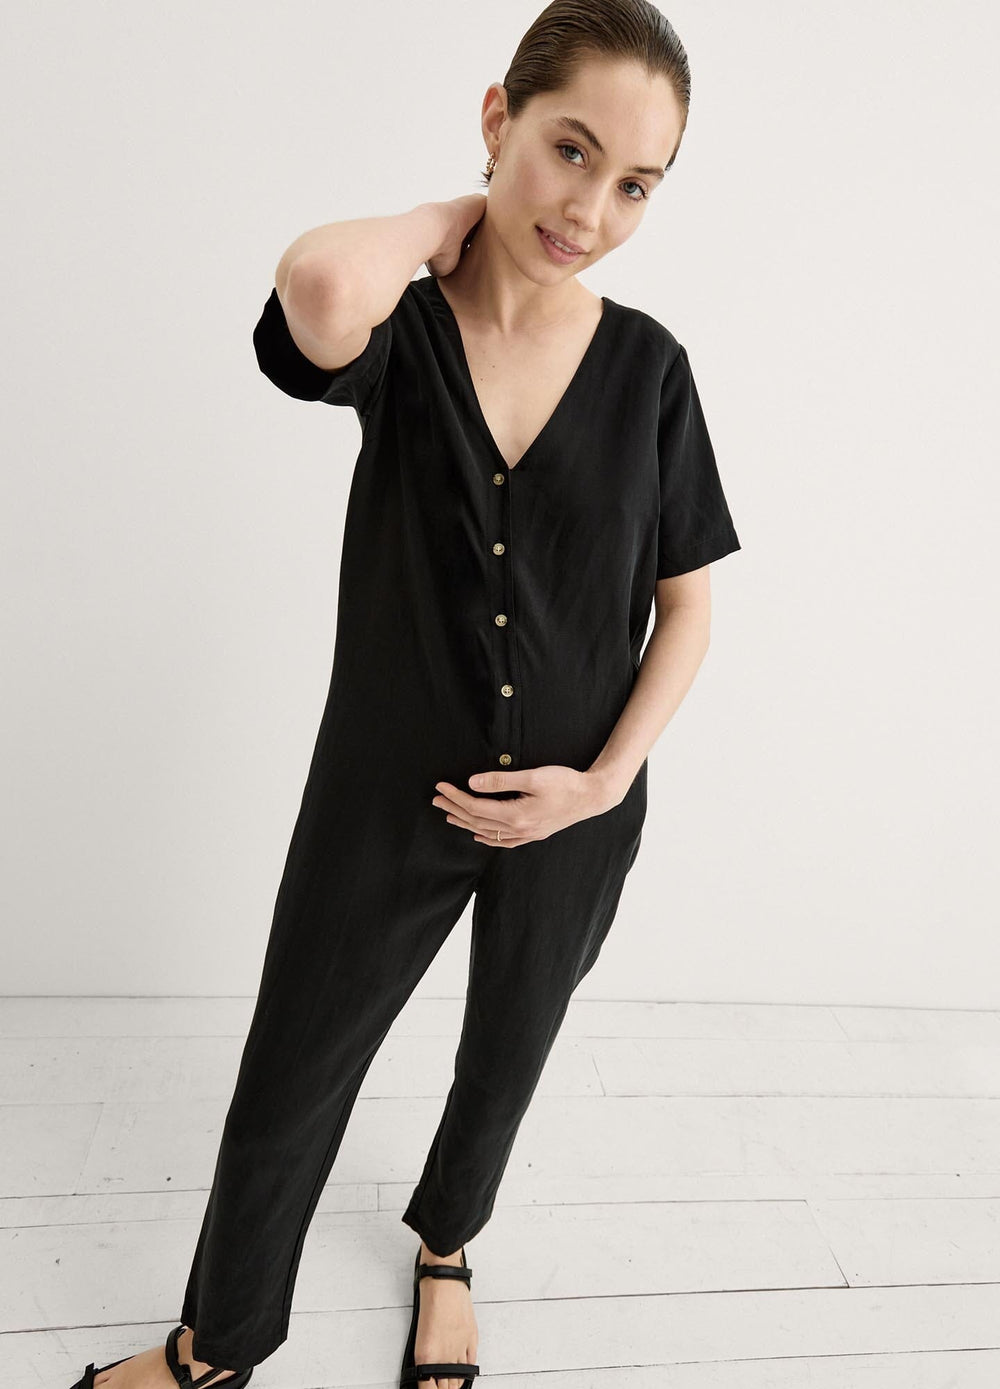 Maternity Work Wear | HATCH Collection – HATCH Collection